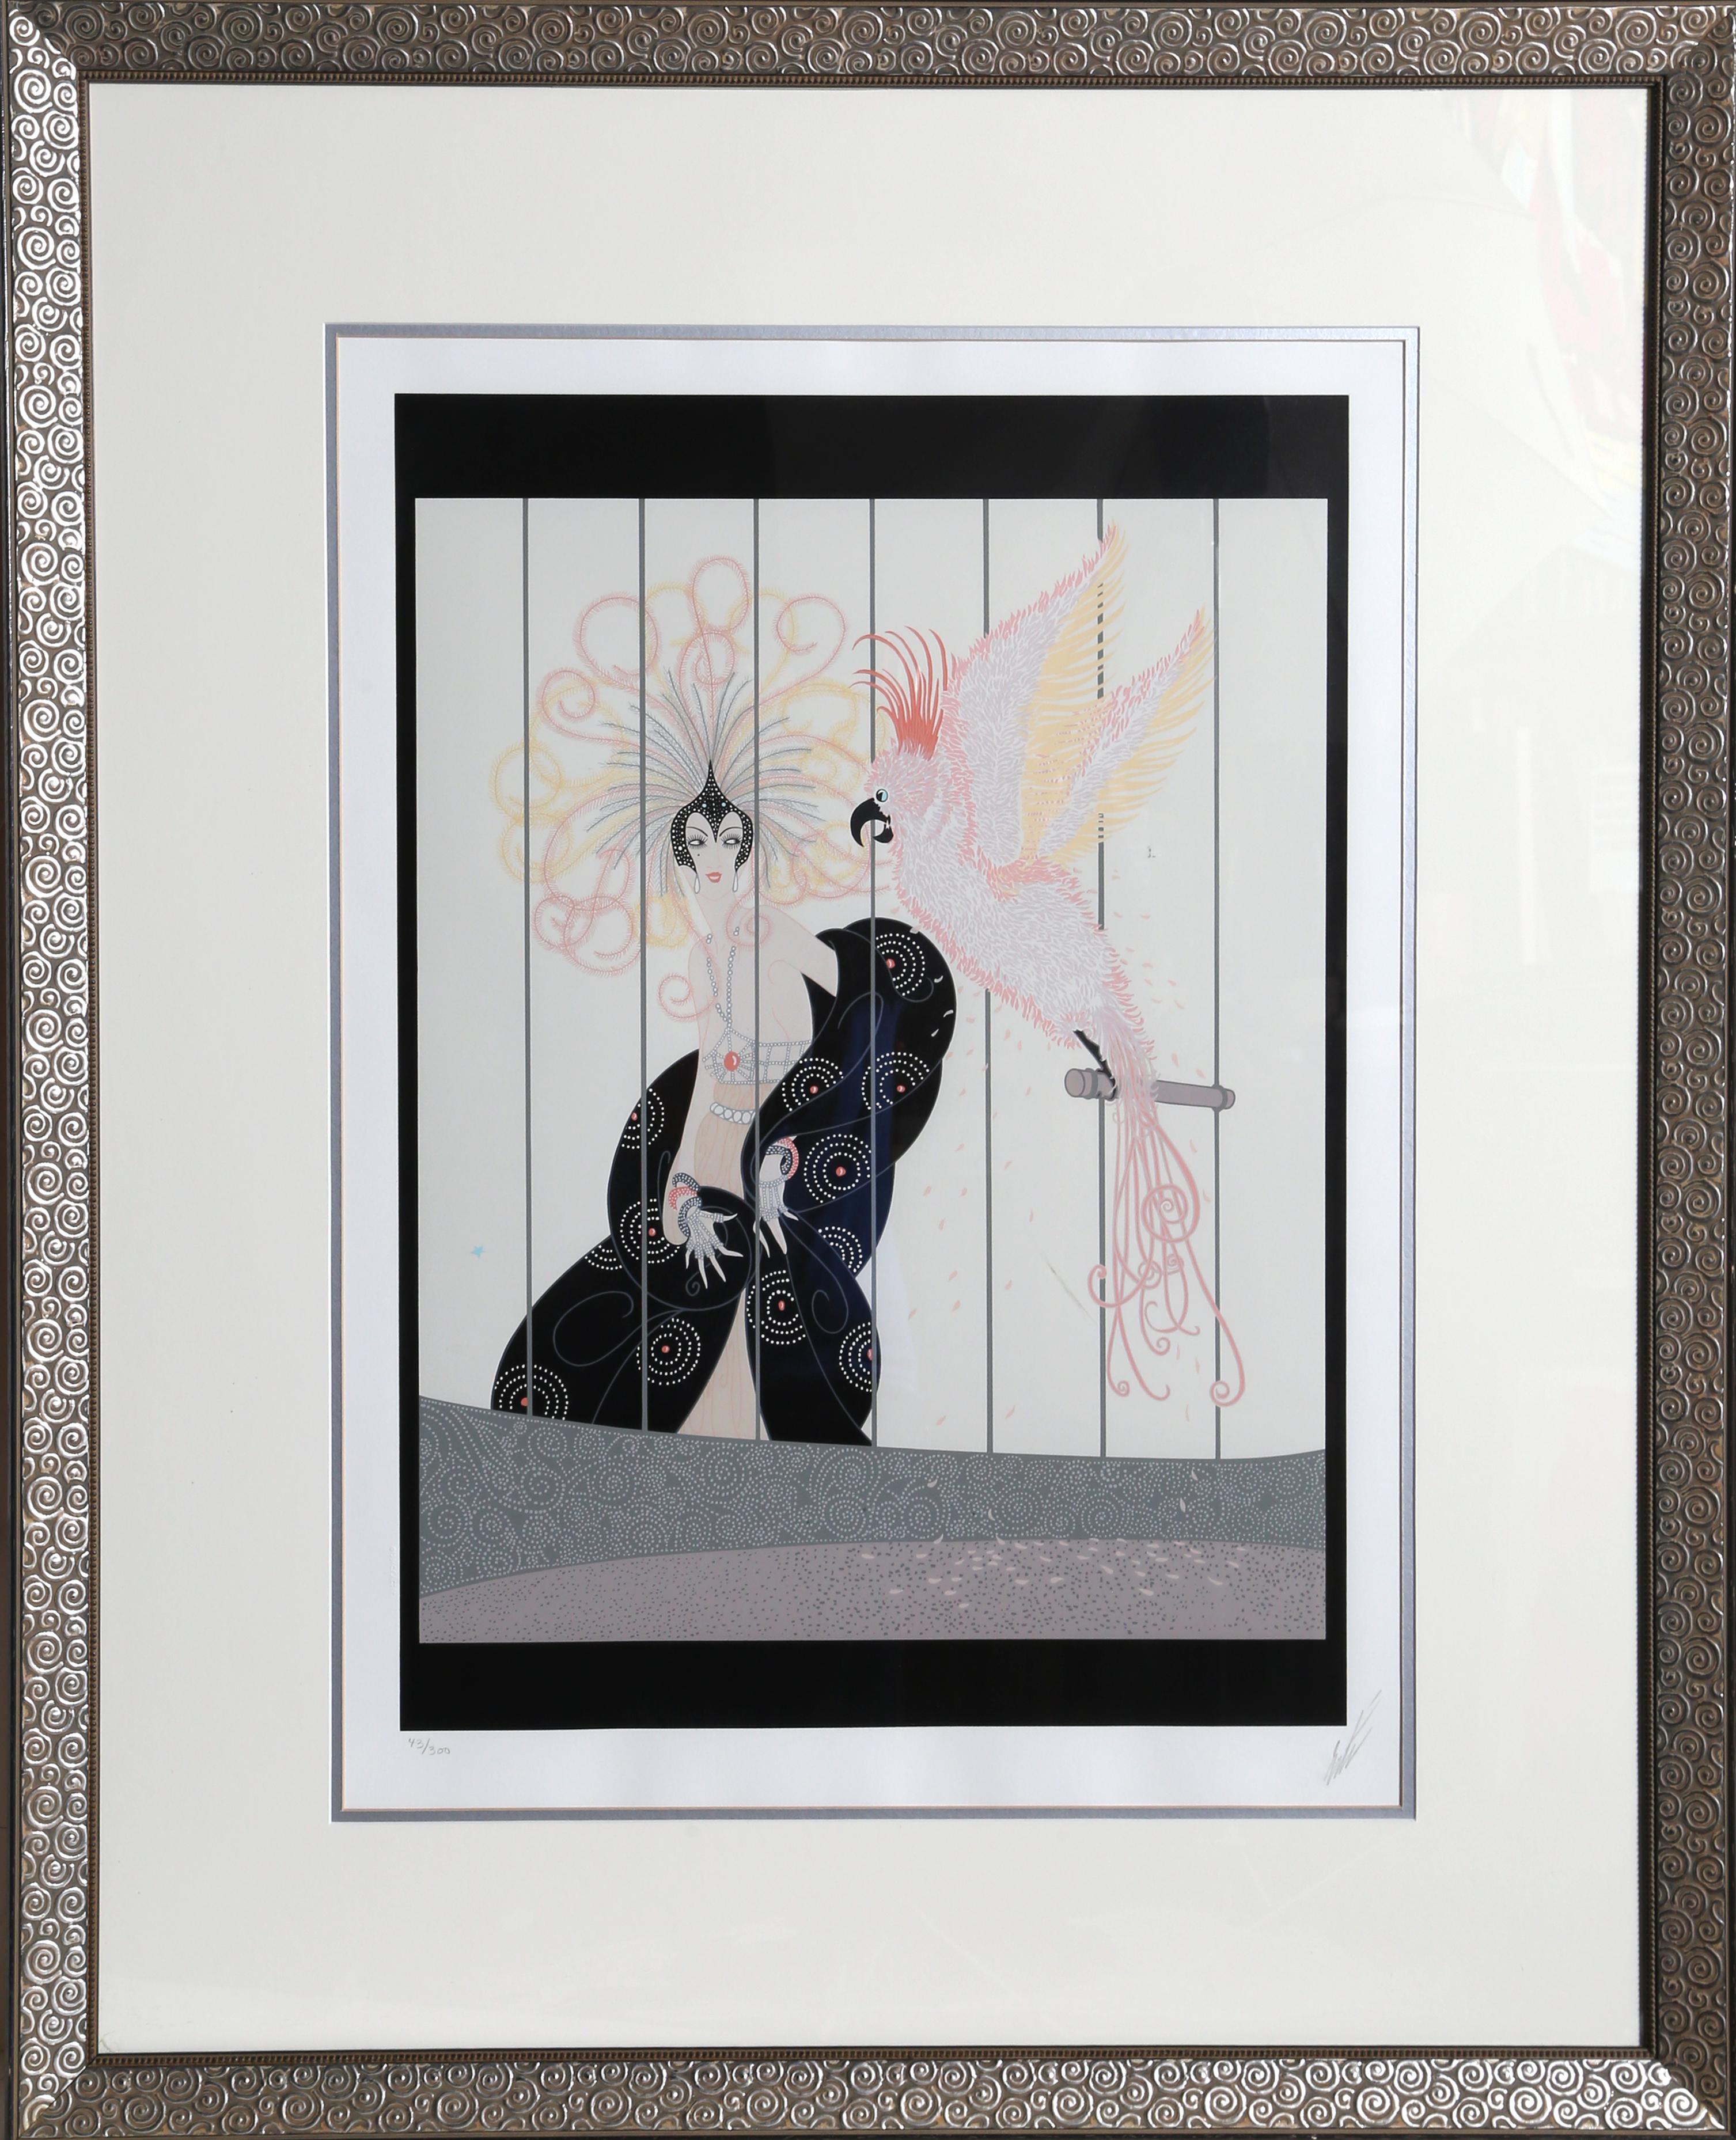 The Bird Cage, Framed Art Deco Serigraph by Erte